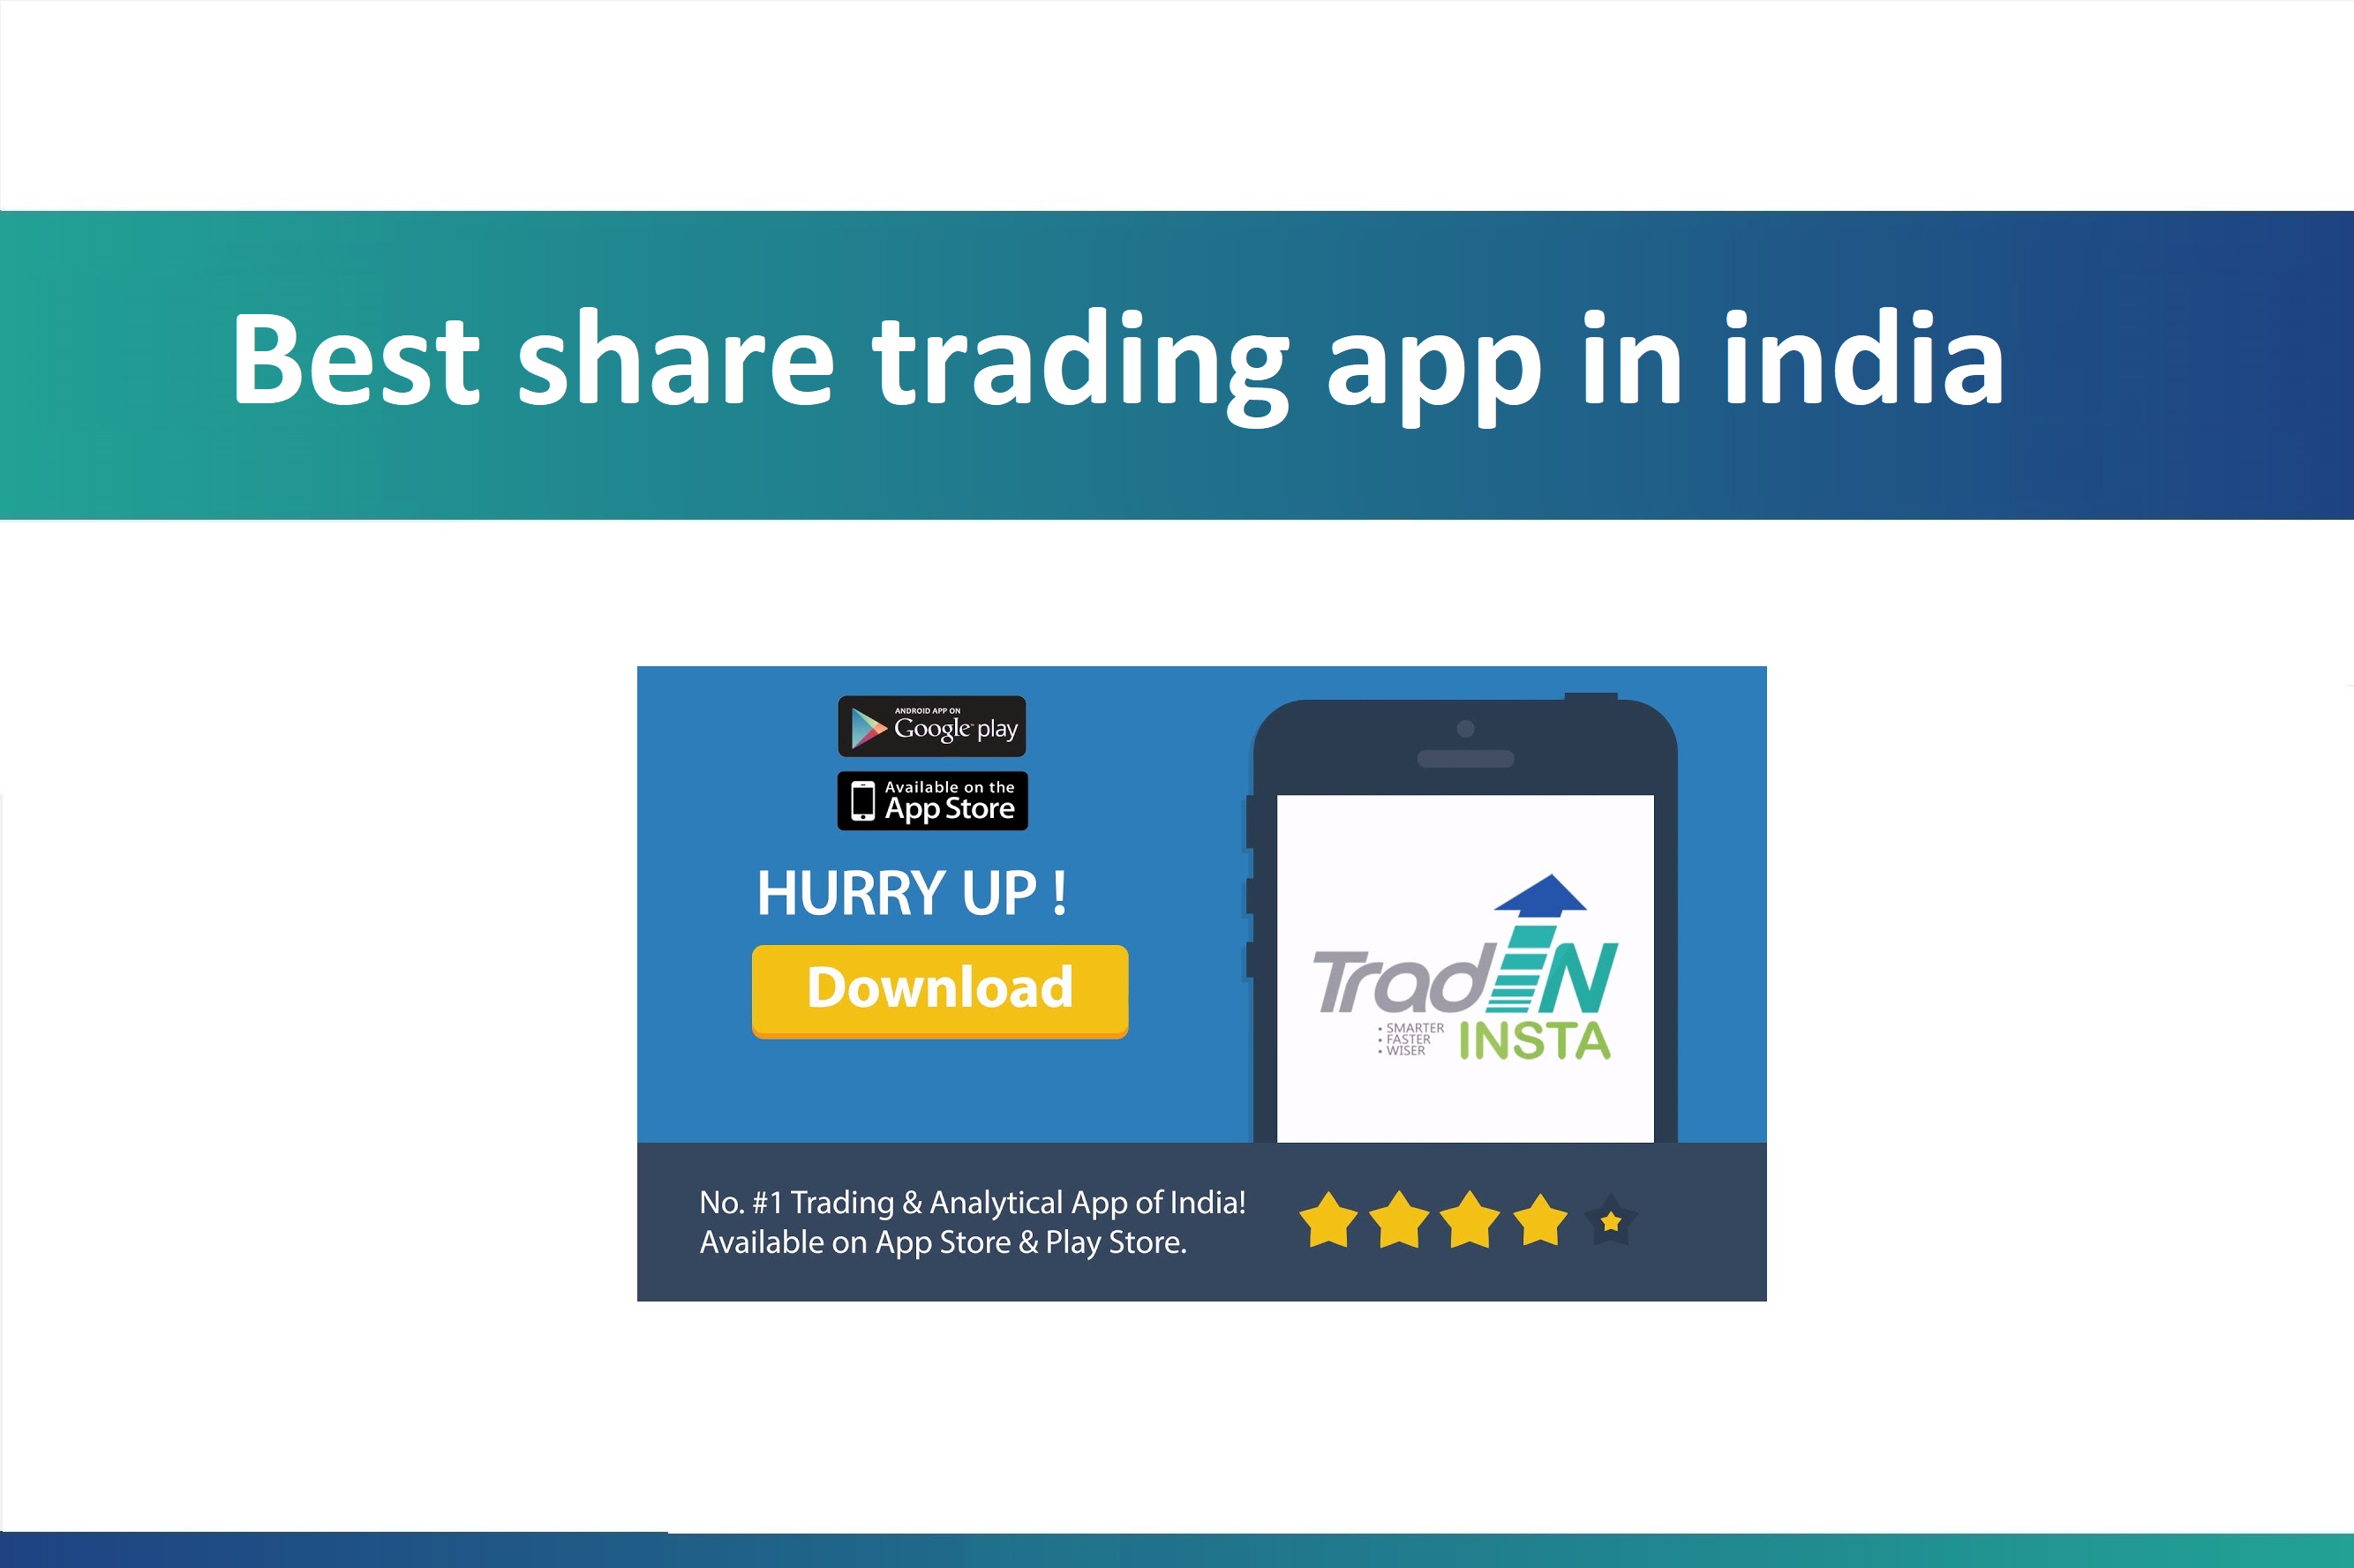 Best share trading app in India